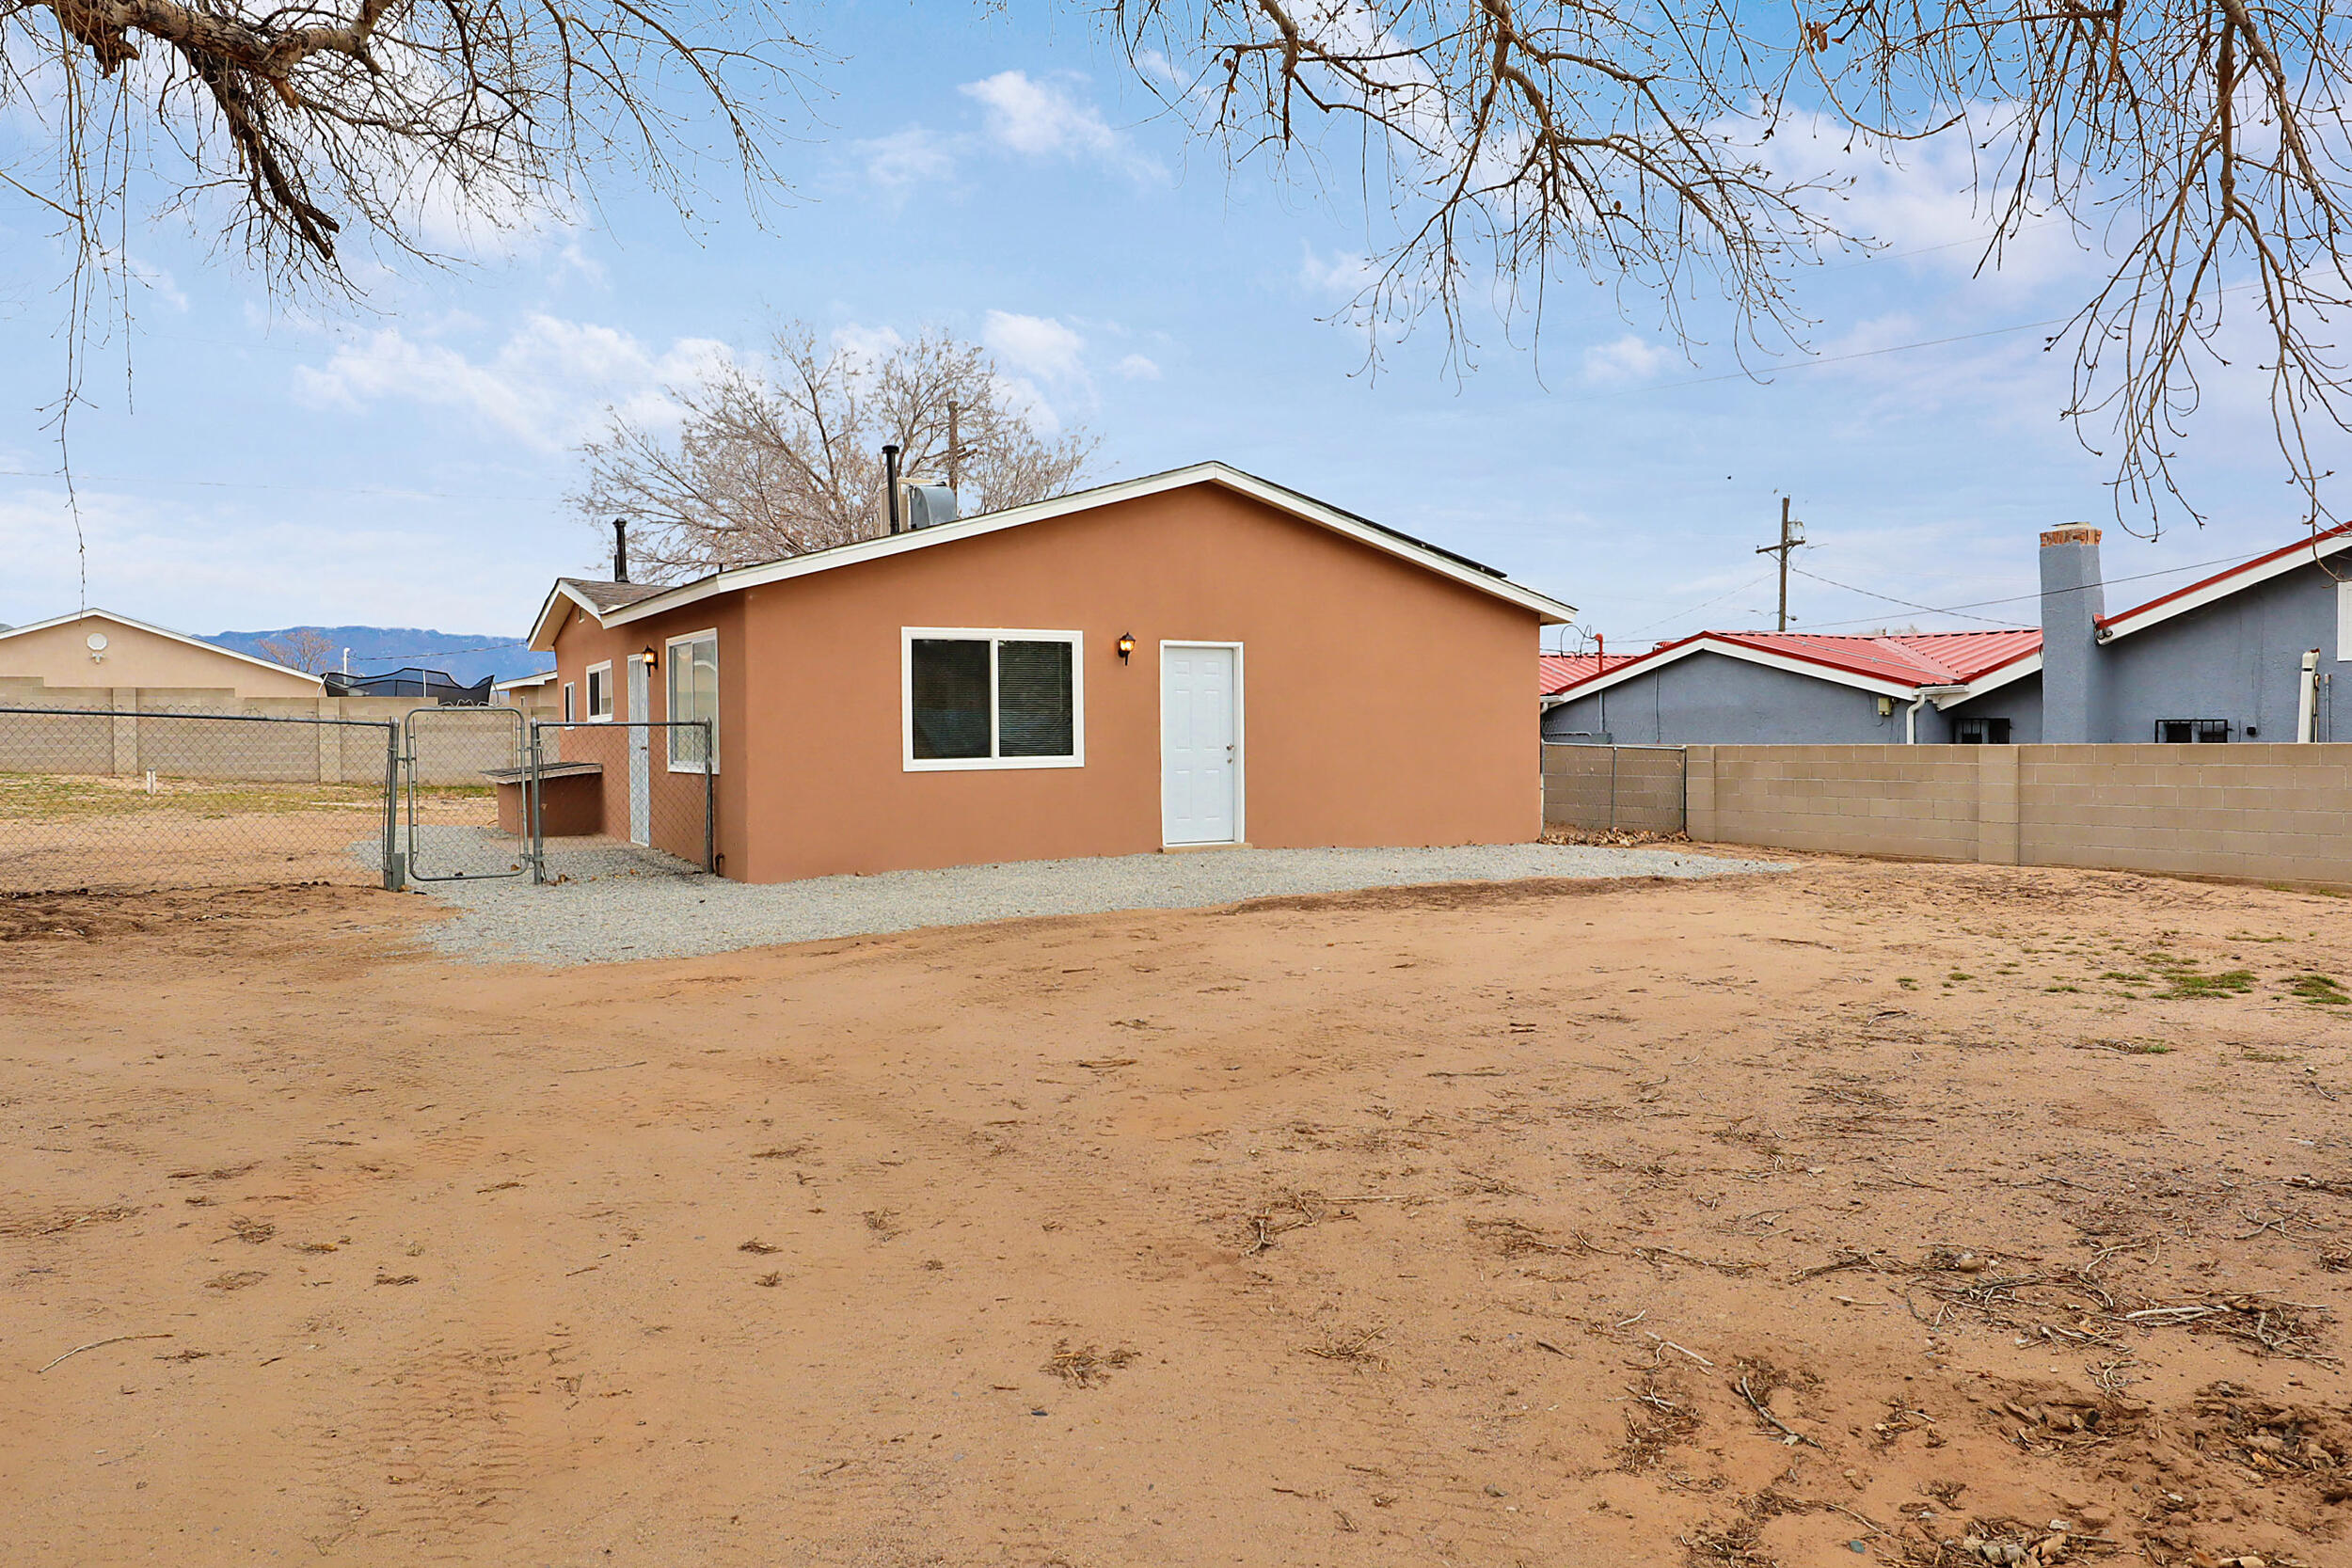 Move in  Ready! Located in the North West area of Albuquerque. This home has remodel throughout.  Big back yard, Owned solar Panels.   This property is within walking distance to park and shopping centers.  Don't miss out on your opportunity to make this charming little home your own.